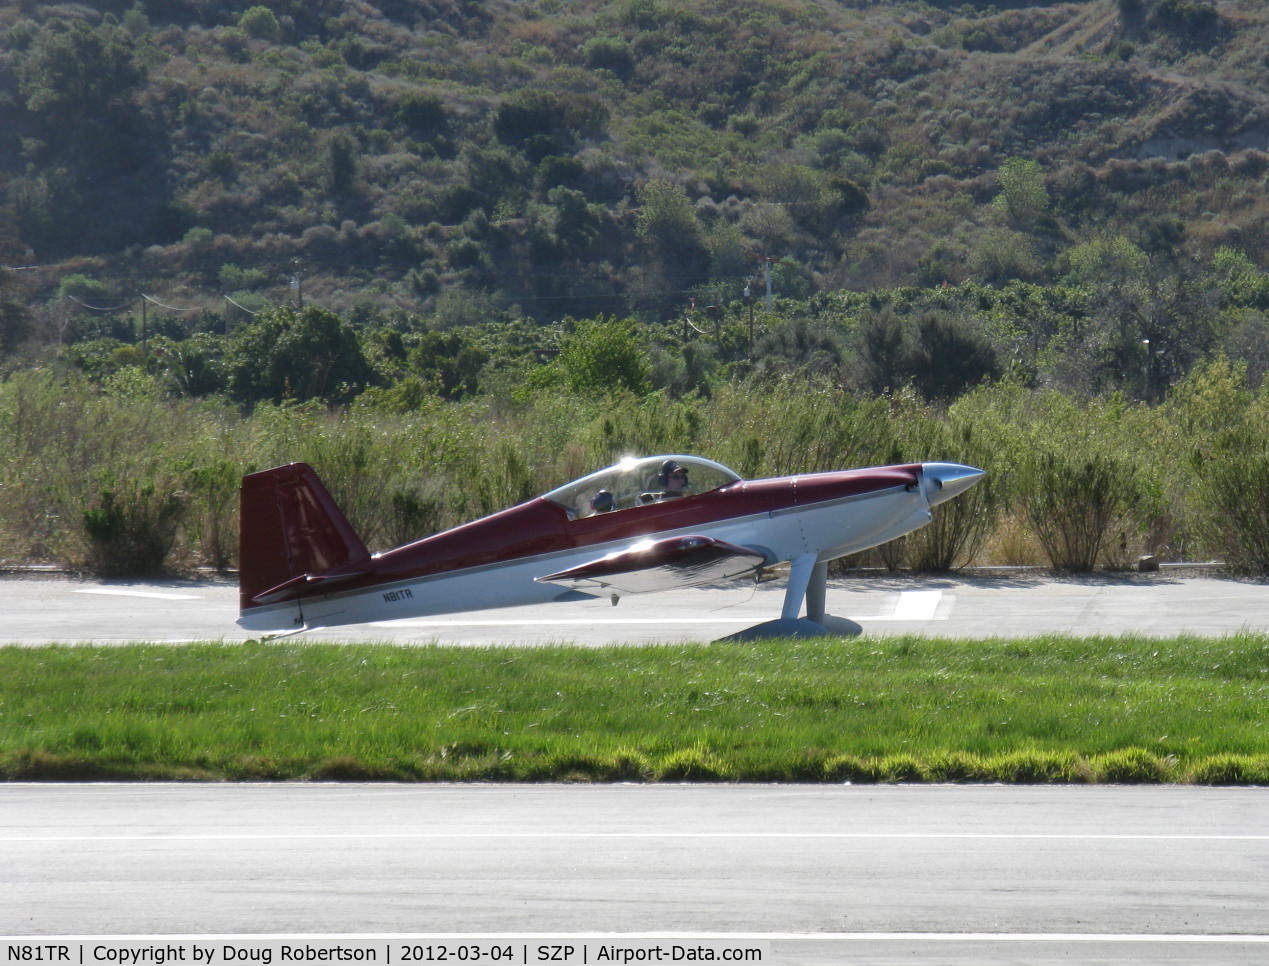 N81TR, Vans RV-4 C/N 009, 2010 Irving IRBD-4, Lycoming IO-540-EXP 330 Hp, taxi to transient parking after landing